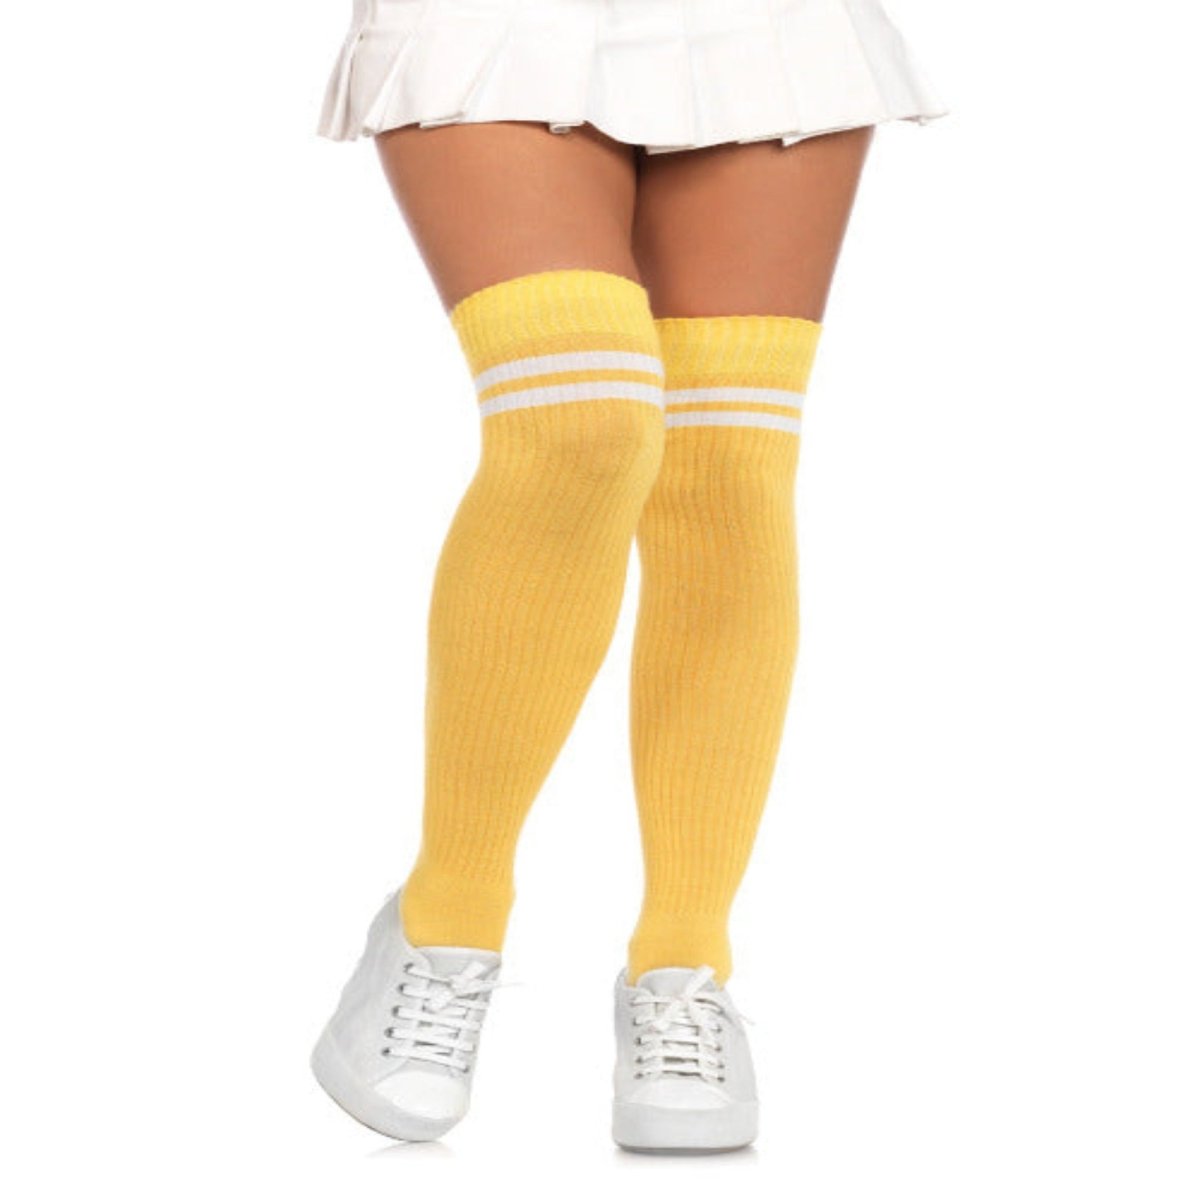 Dina Athletic Thigh High Stockings - worldclasscostumes